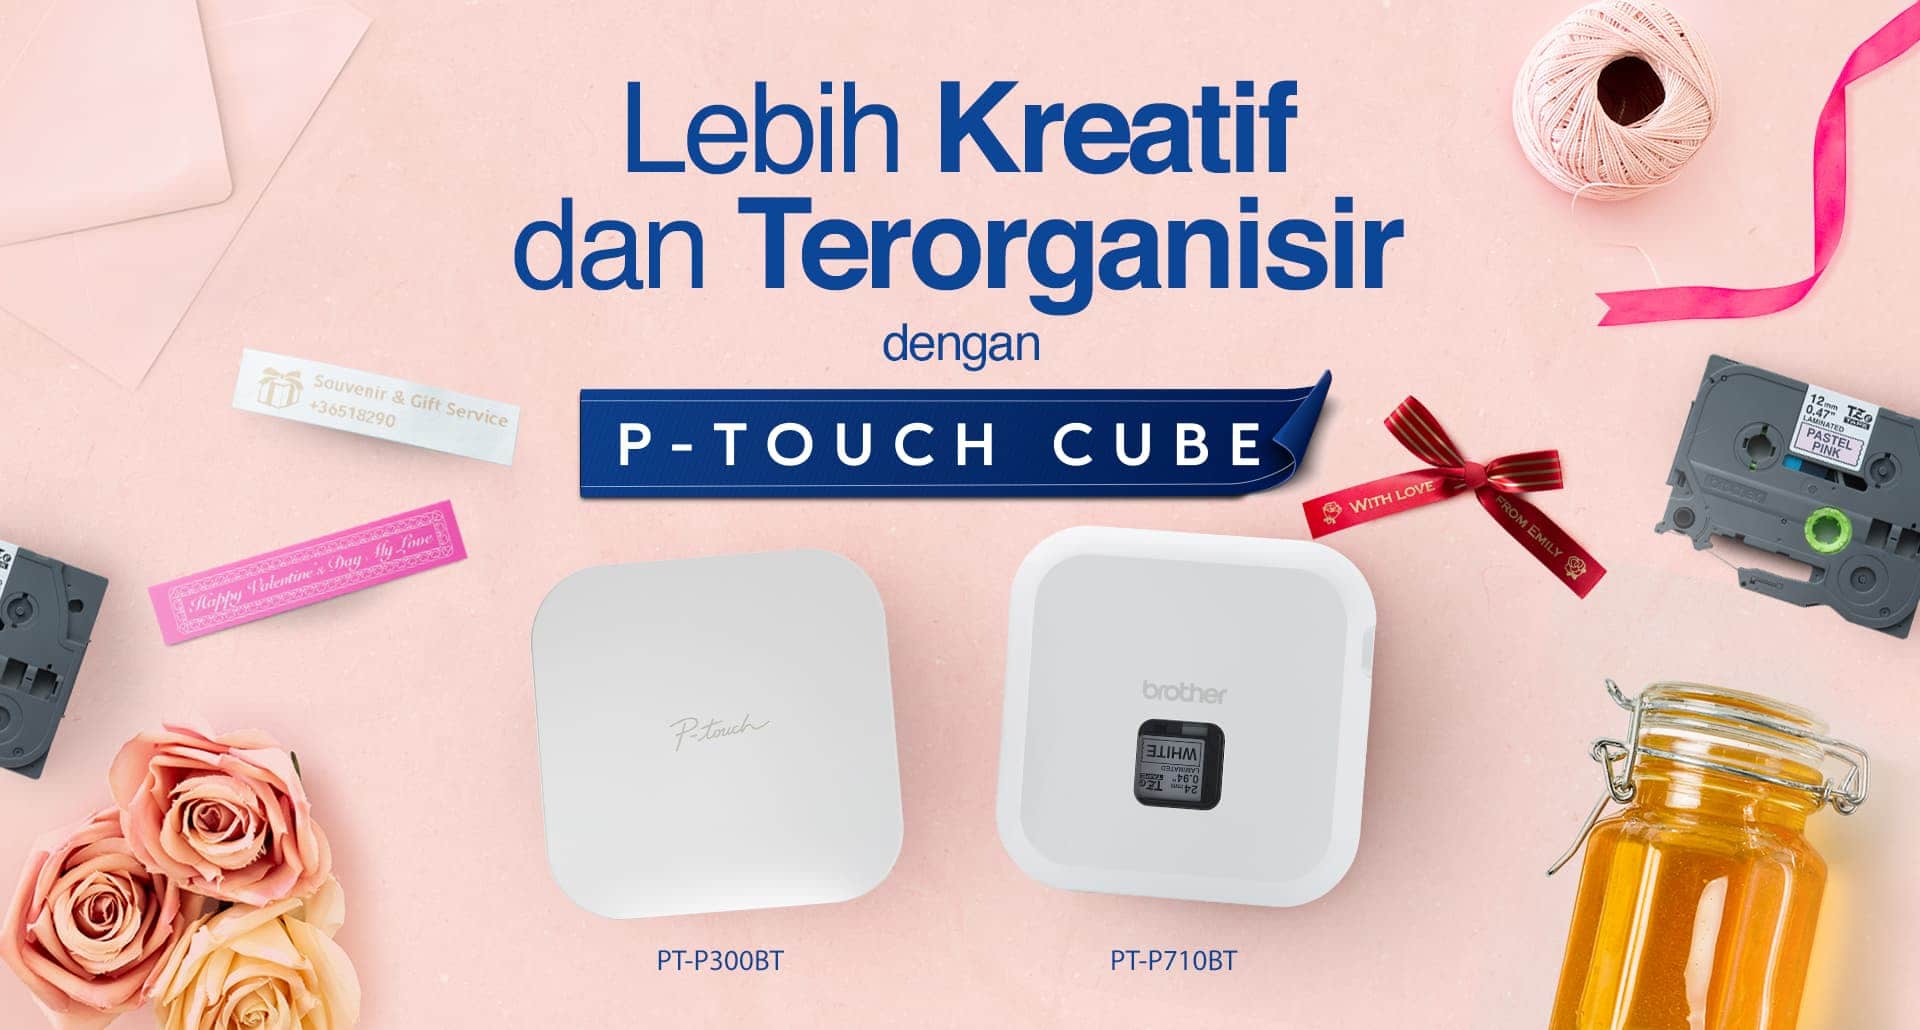 P-TOUCH CUBE Sleek & Modern labellers for your creative lifestyle